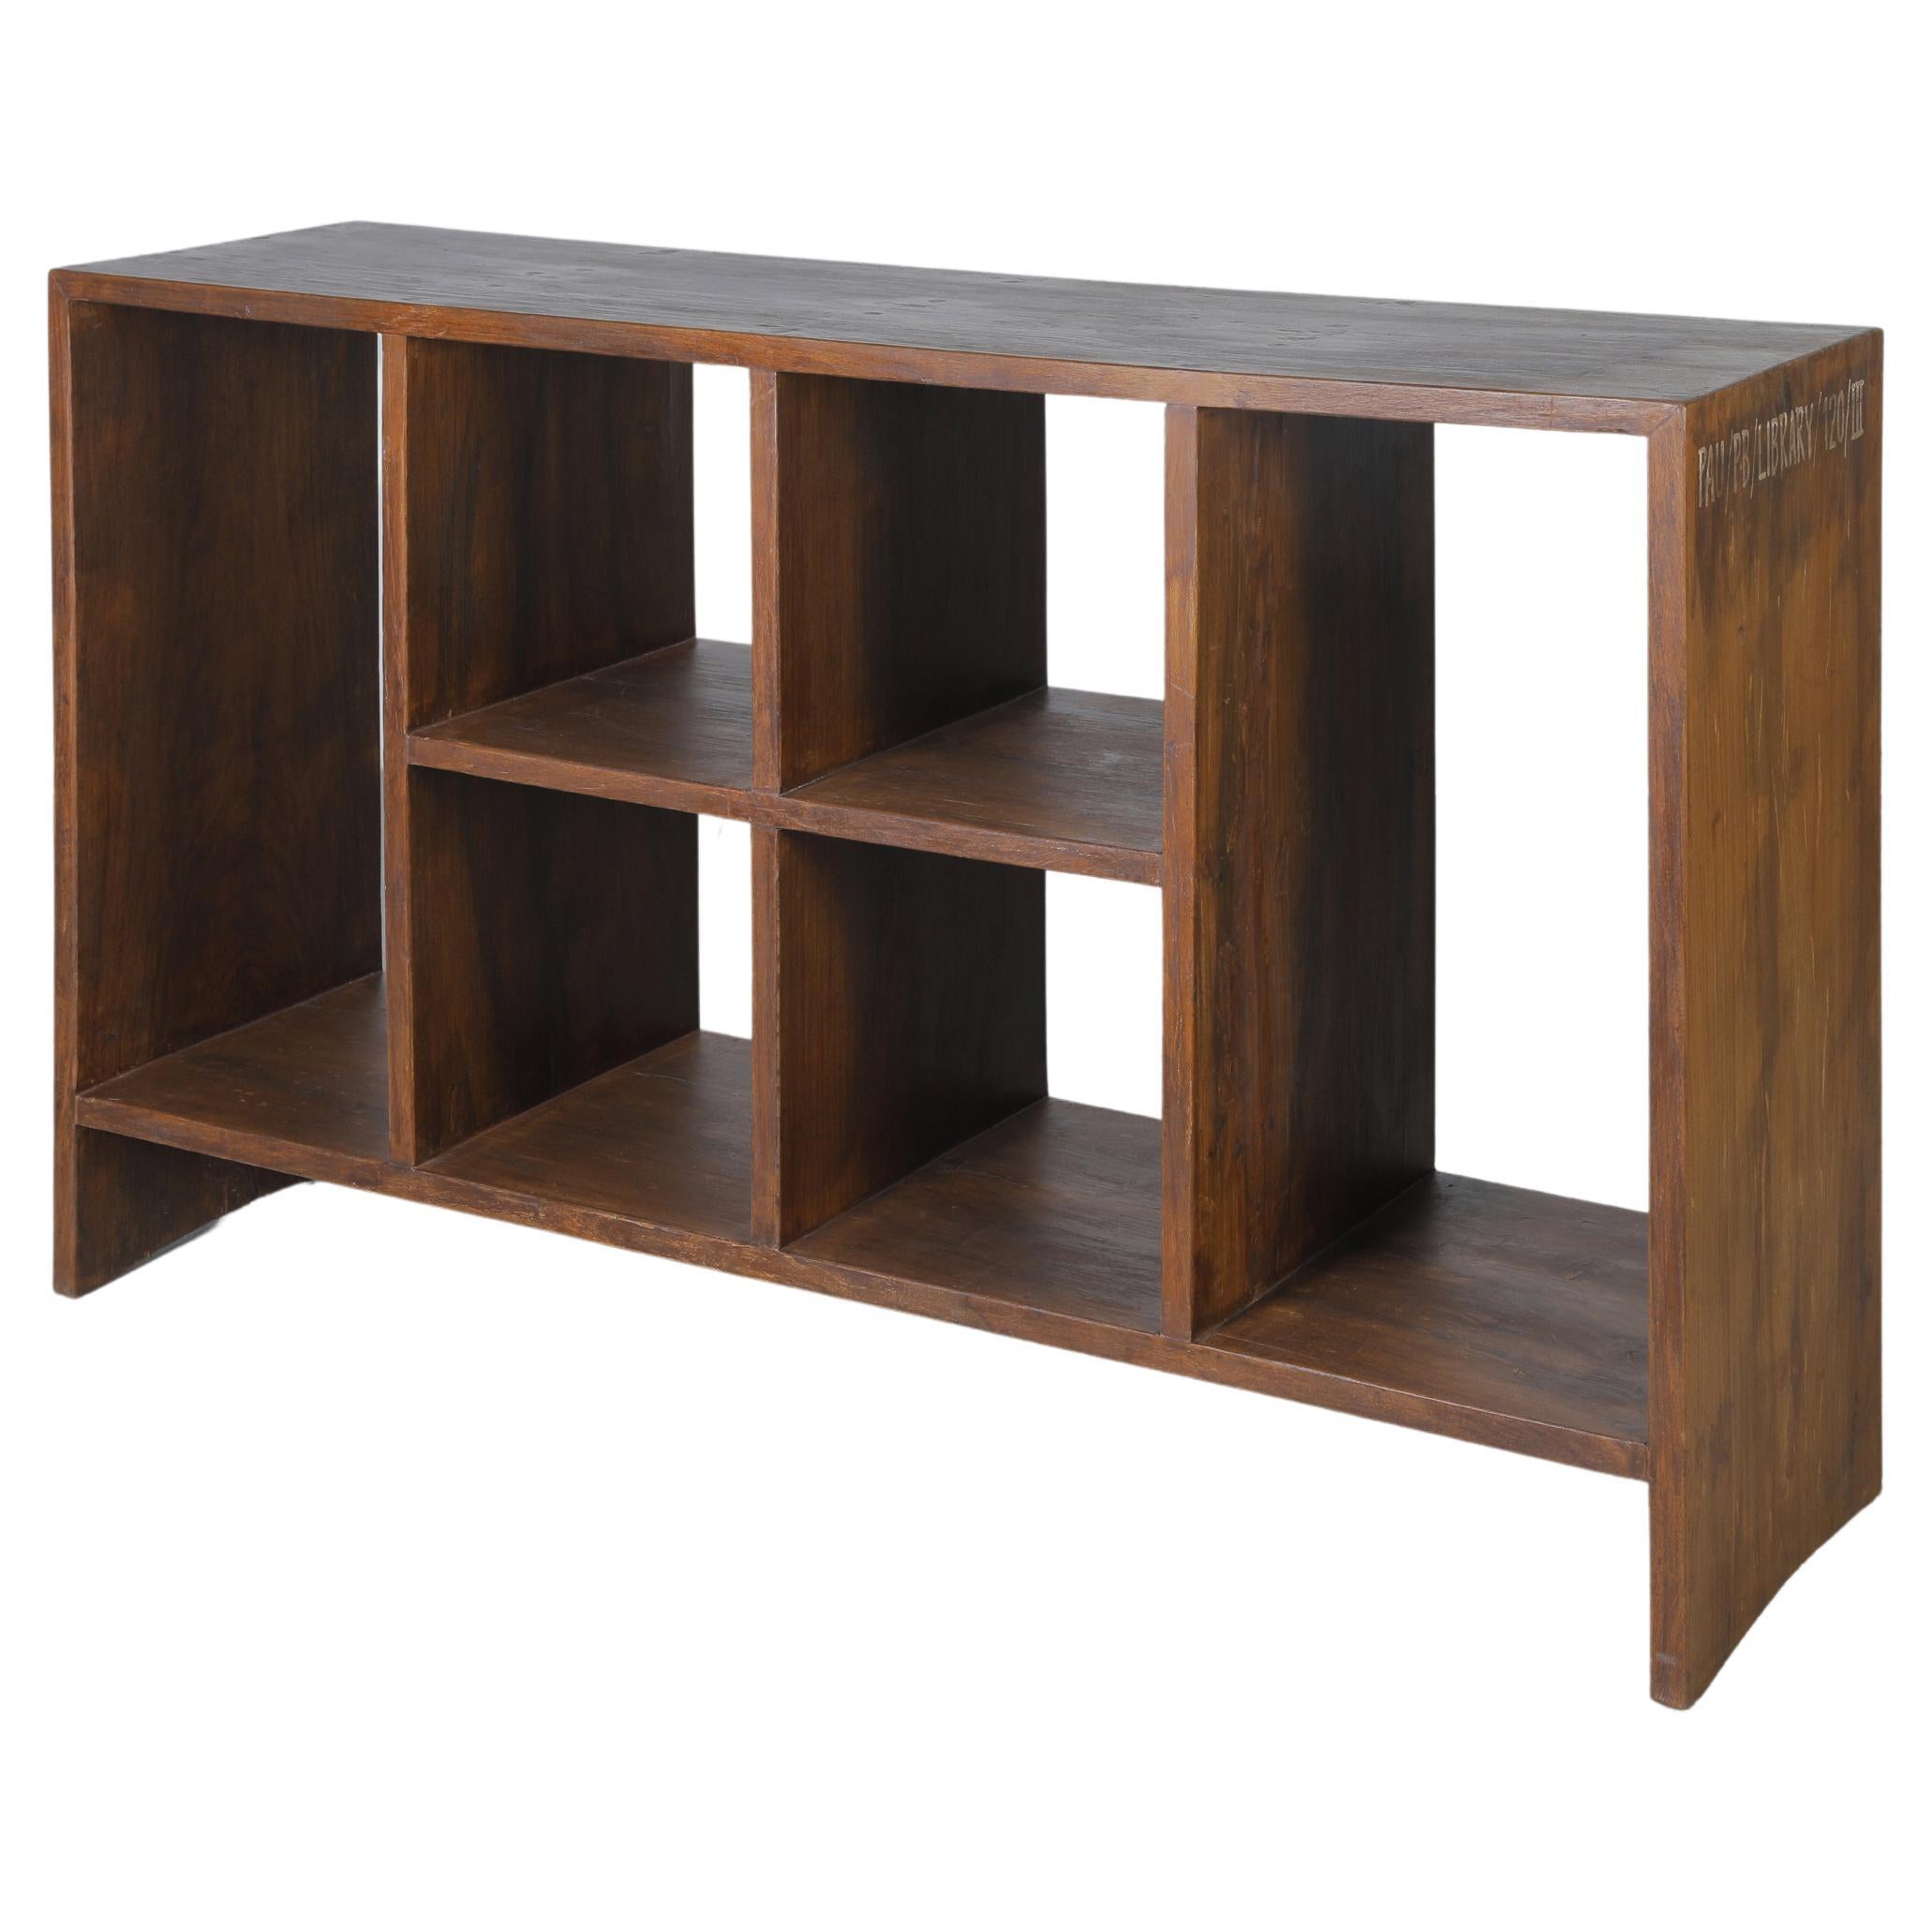 Pierre Jeanneret PJ-R-27-A File Rack / Authentic Mid-Century Modern Chandigarh For Sale